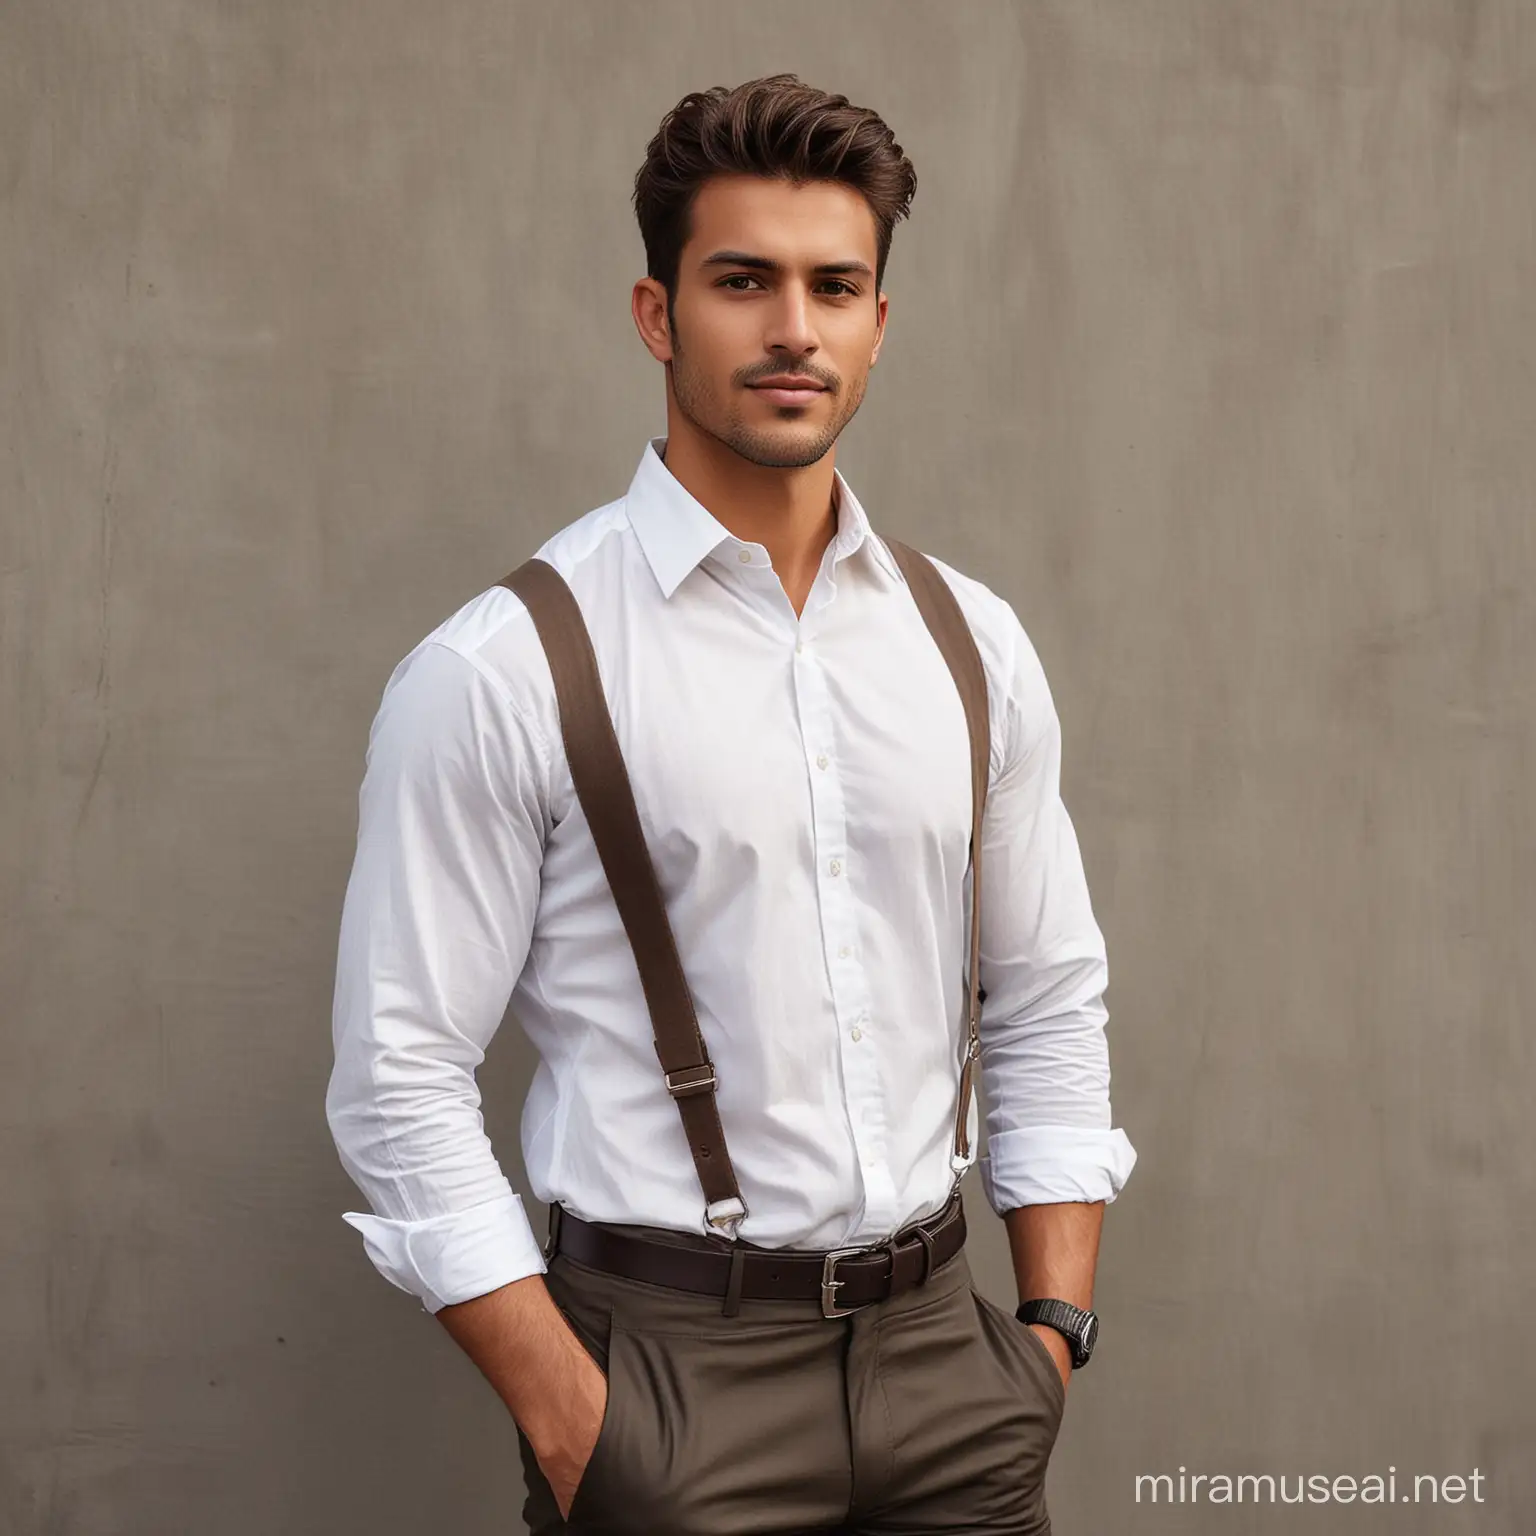 Create an image of a handsome, good-looking man who embodies both affluence and warmth. He stands over six feet tall, with fair to wheatish skin and deep brown eyes that convey trust and kindness. His body is muscular, well-toned, reflecting his health-conscious lifestyle. His hair is styled in trendy spikes, adding a youthful edge to his appearance.

He is dressed in smart-casual attire suitable for a construction business professional, perhaps a crisp, well-fitted shirt with rolled-up sleeves and tailored trousers, conveying his role as a successful entrepreneur in the construction industry. His posture is confident yet approachable, and his expression is friendly and sincere, highlighting his loyal, respectful, and trustworthy nature.

This man is depicted in a scenario that shows his family-oriented and peaceful demeanor, perhaps in a serene setting where he is interacting gently with family or engaged in a community project, underscoring his kind and responsible character. Accessories like a watch or a planner might subtly indicate his organized, intelligent, and responsible traits. His surroundings should reflect a balance of elegance and simplicity, illustrating his fun-loving, romantic side, perhaps with elements that suggest outdoor activities or romantic settings, alluding to his adventurous and loving personality.